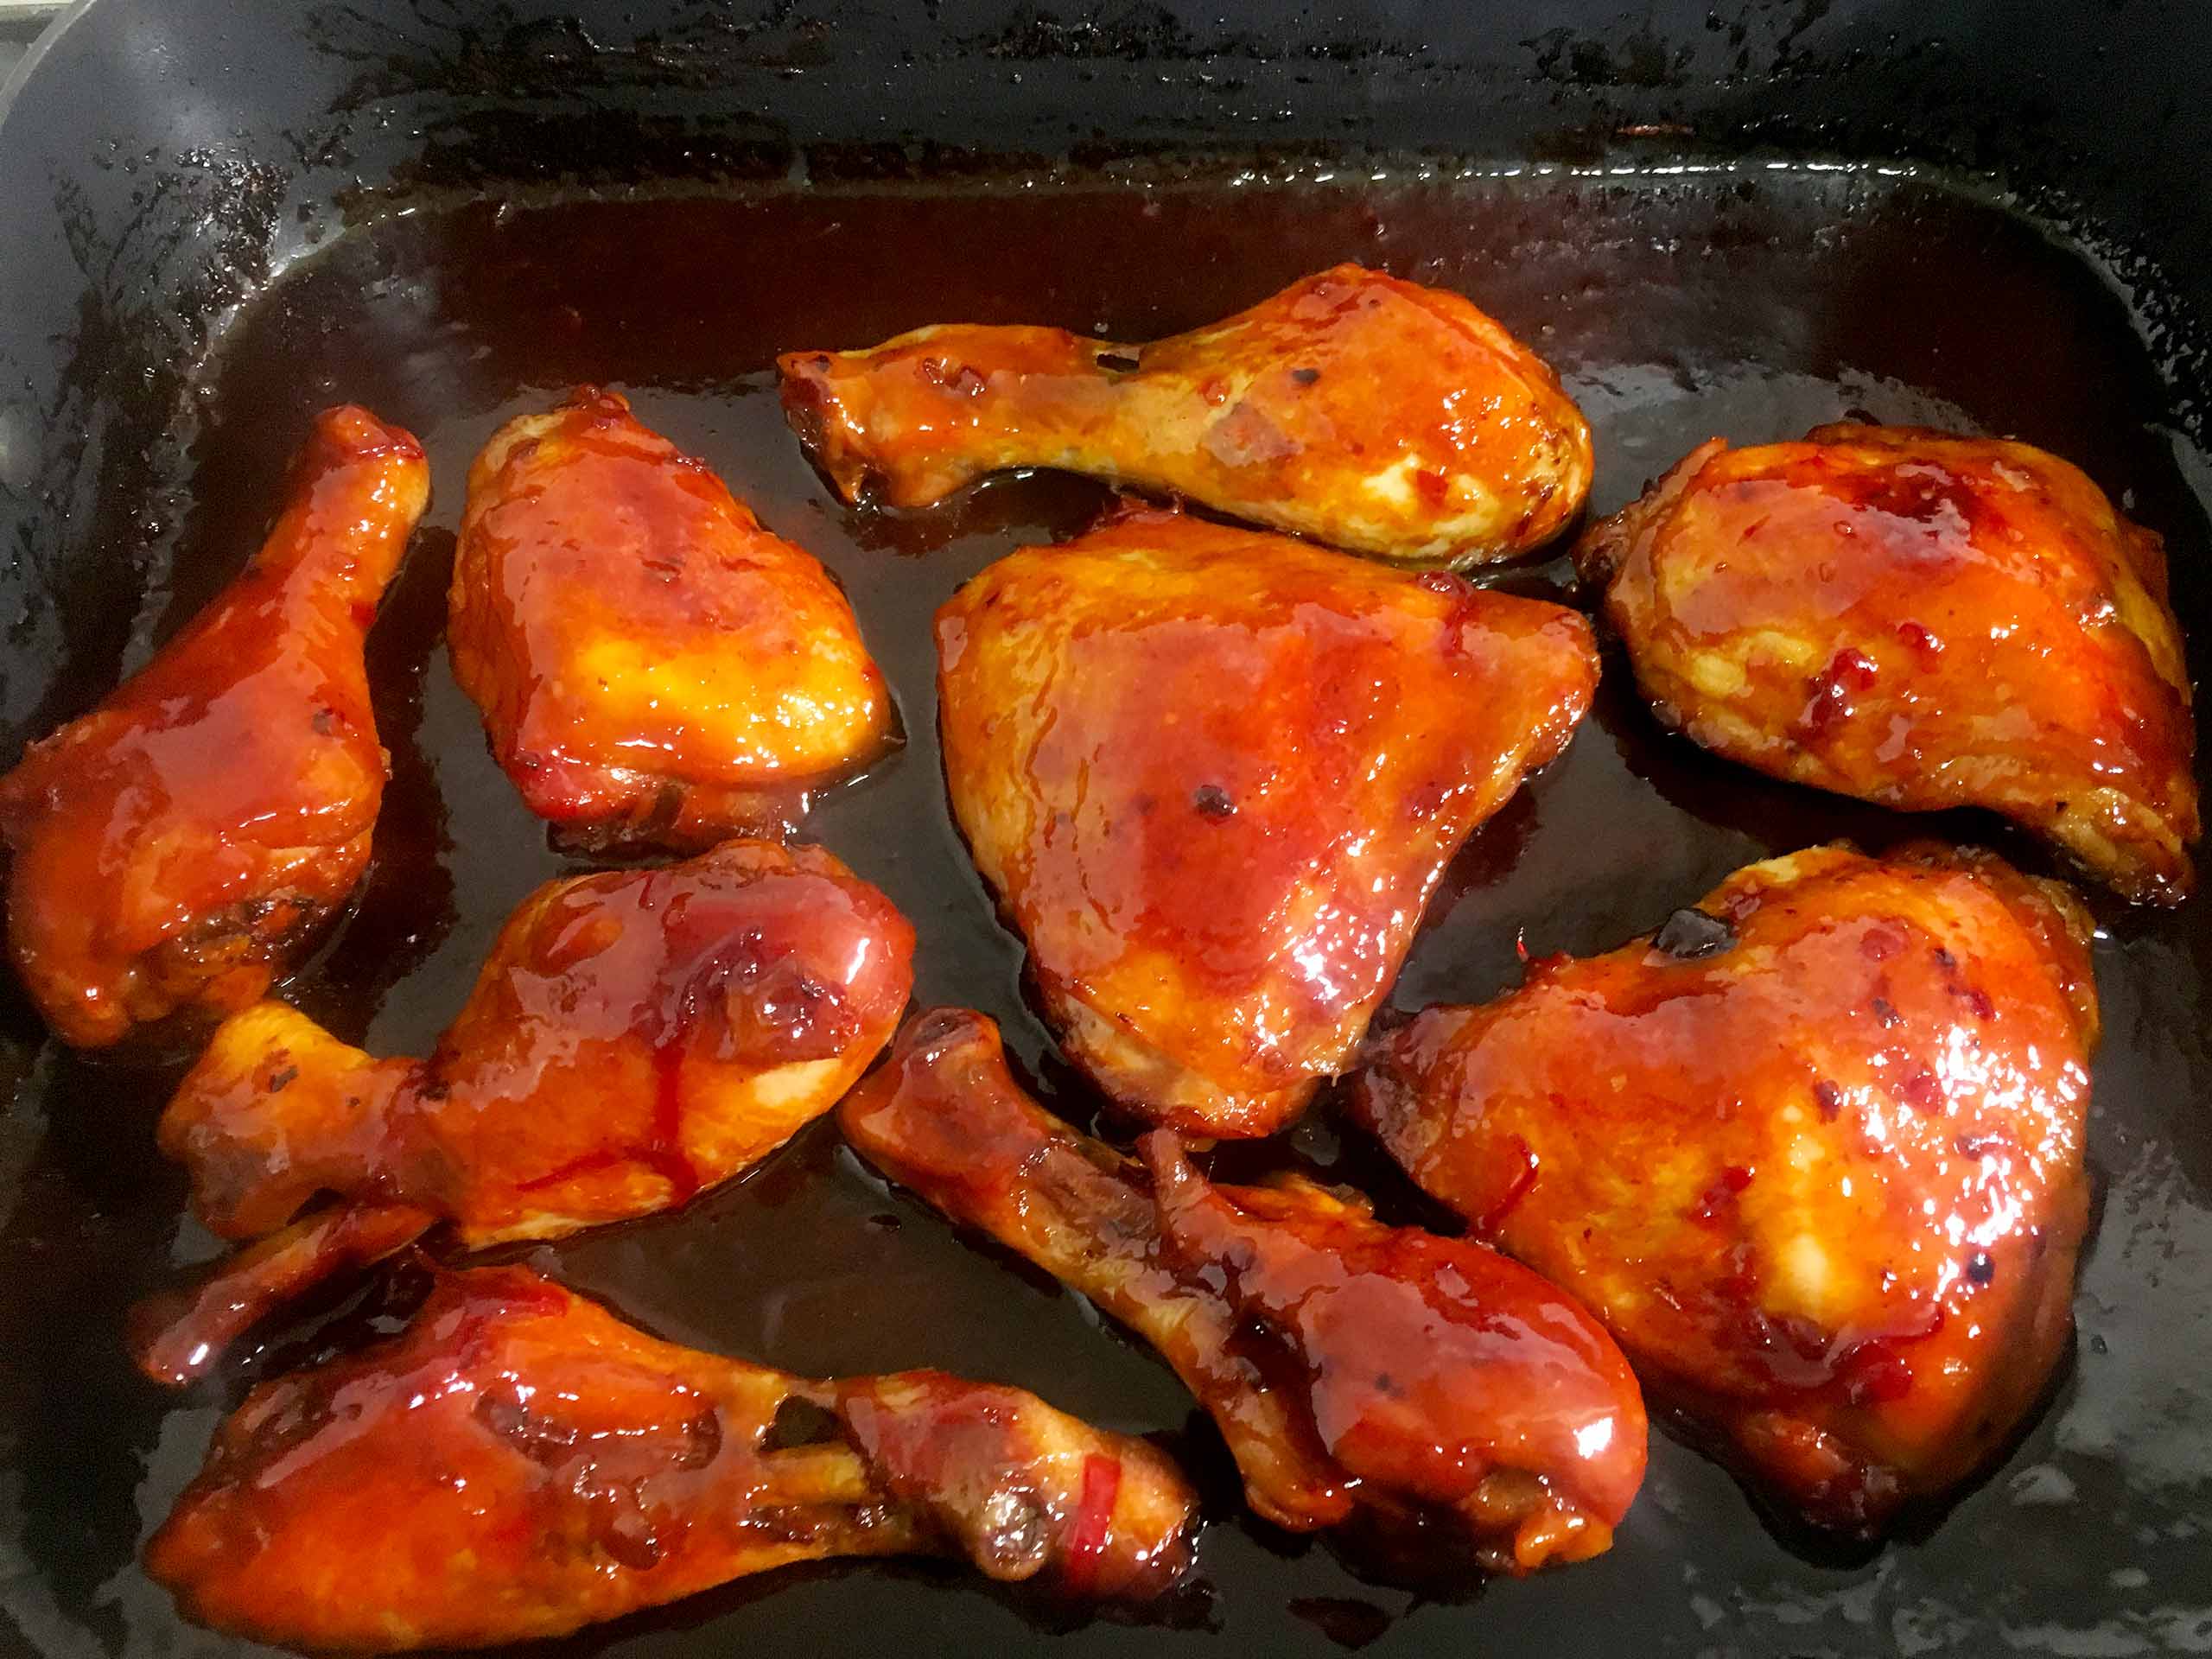 check the sauce chicken in sweet chili sauce with touches of spiciness